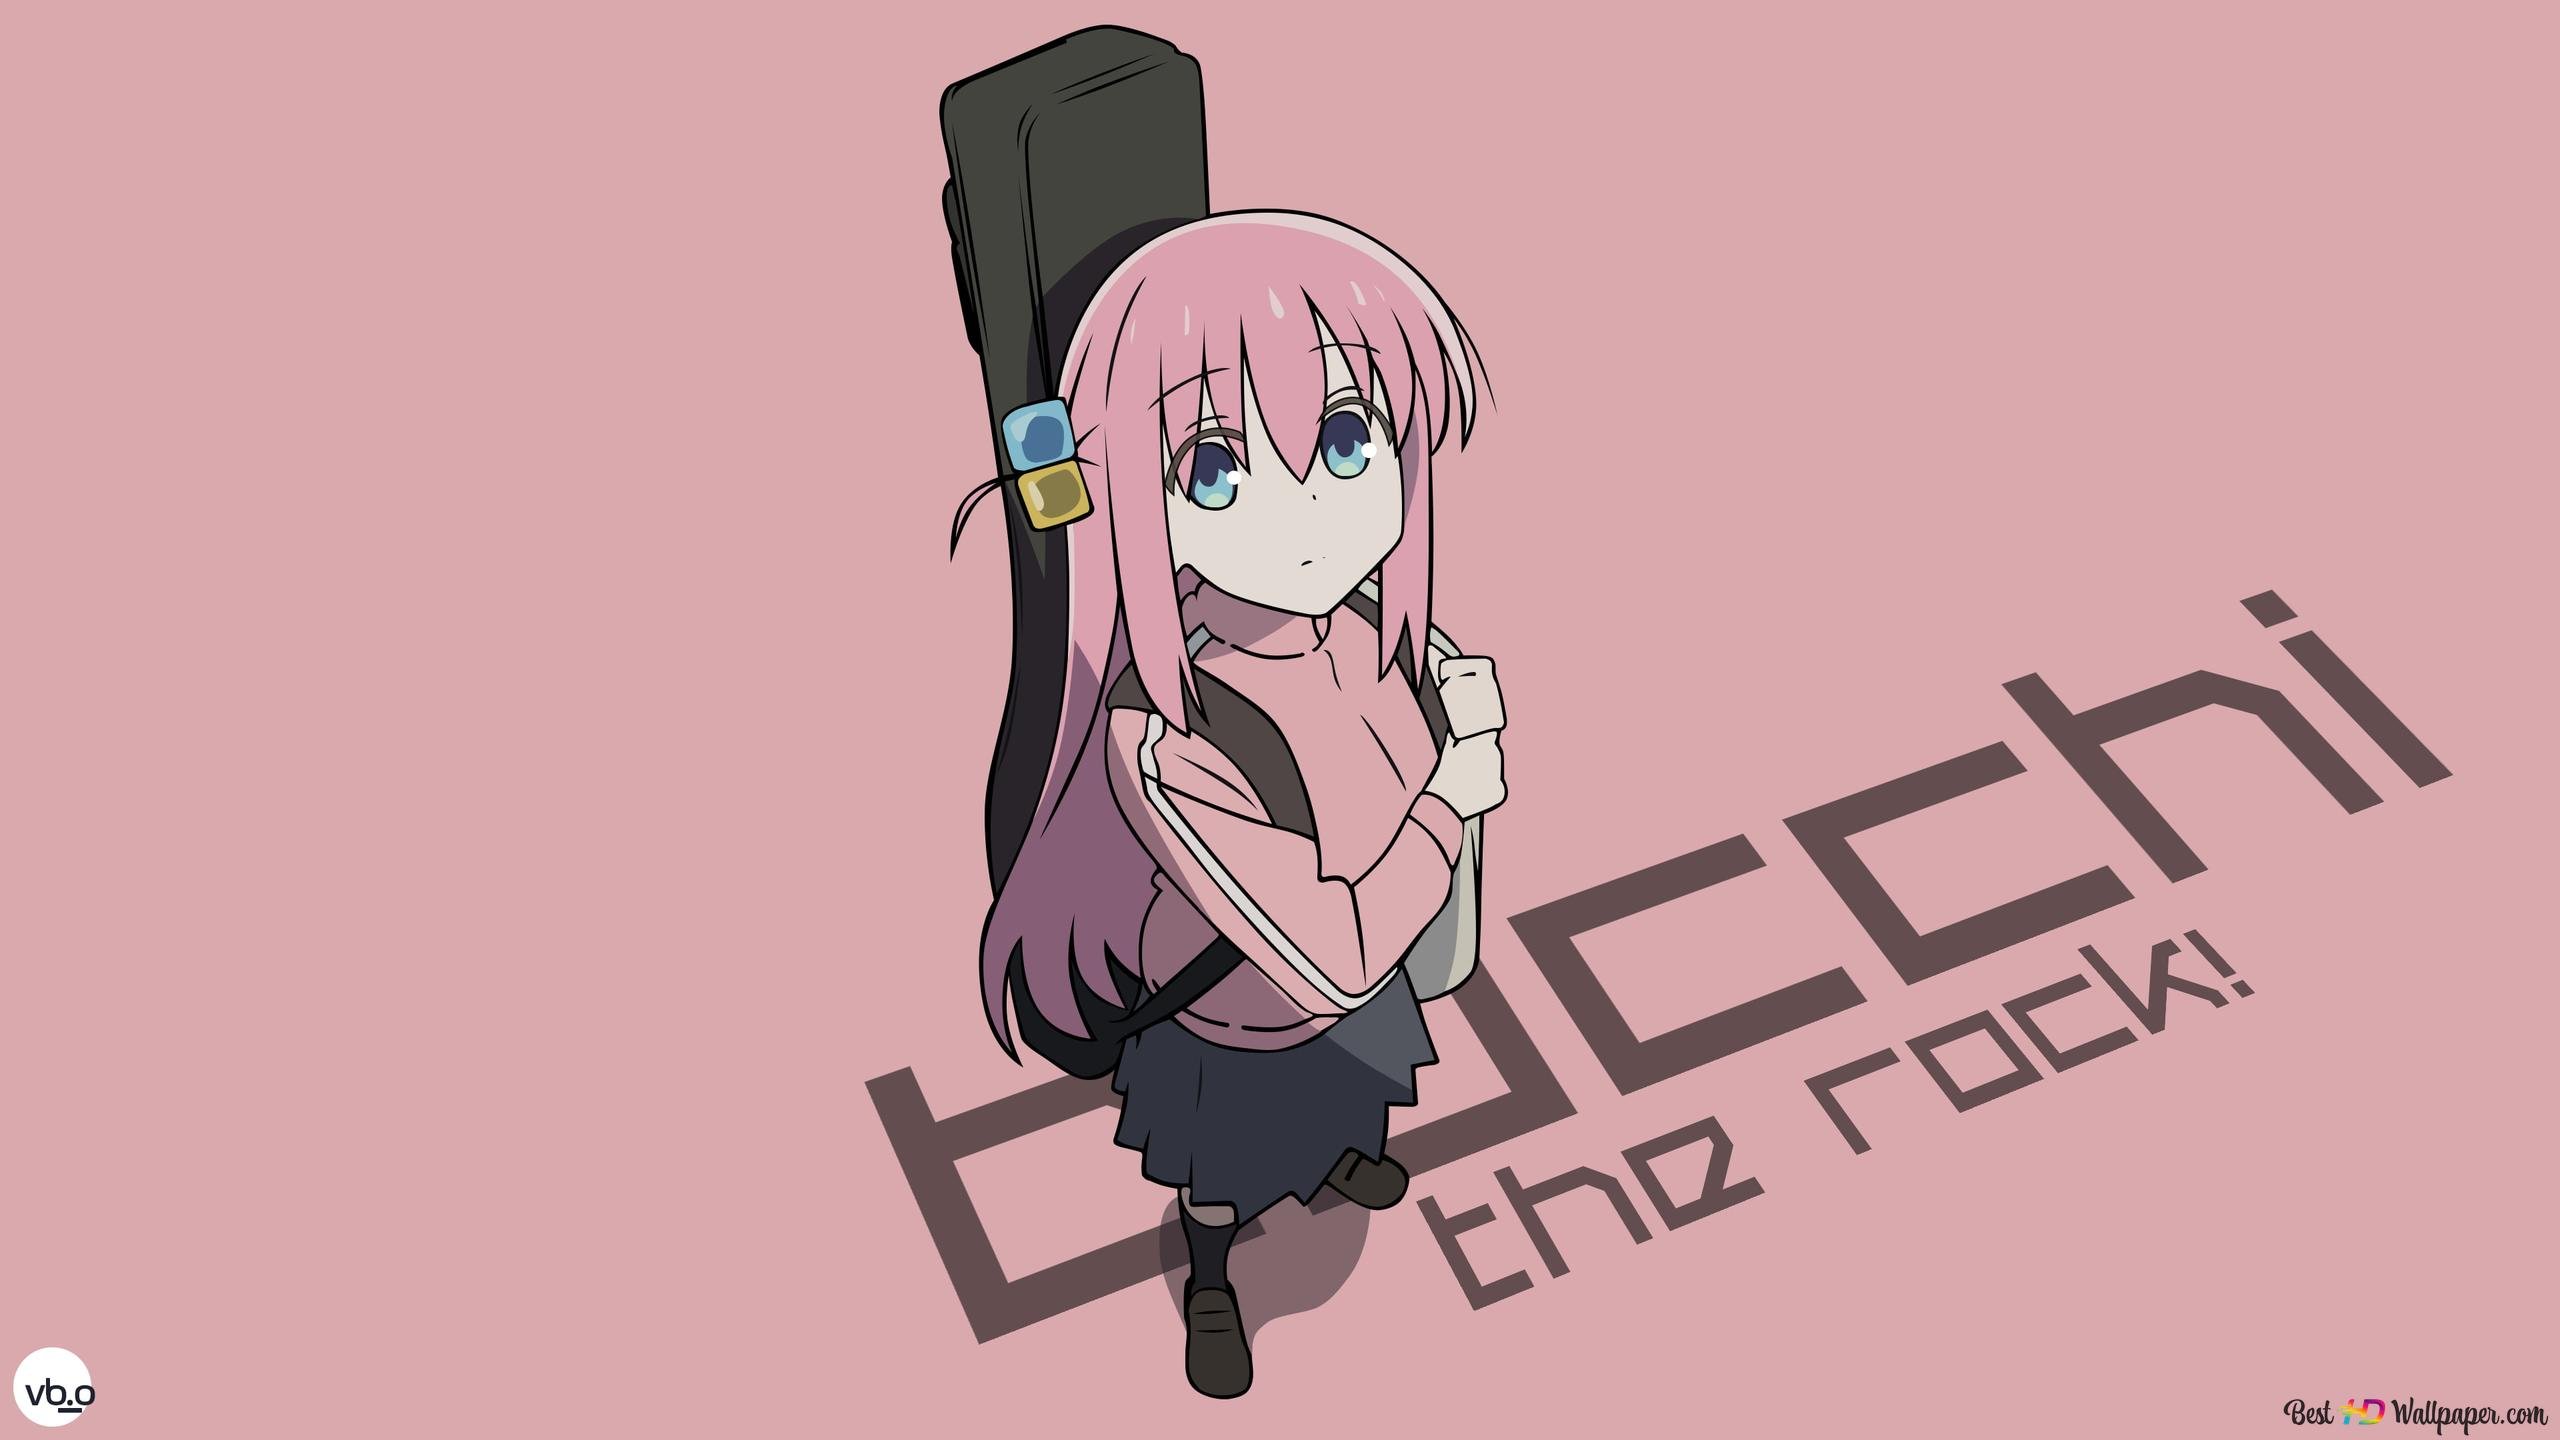 Bocchi The Rock anime character pink haired musician girl 4K wallpaper download